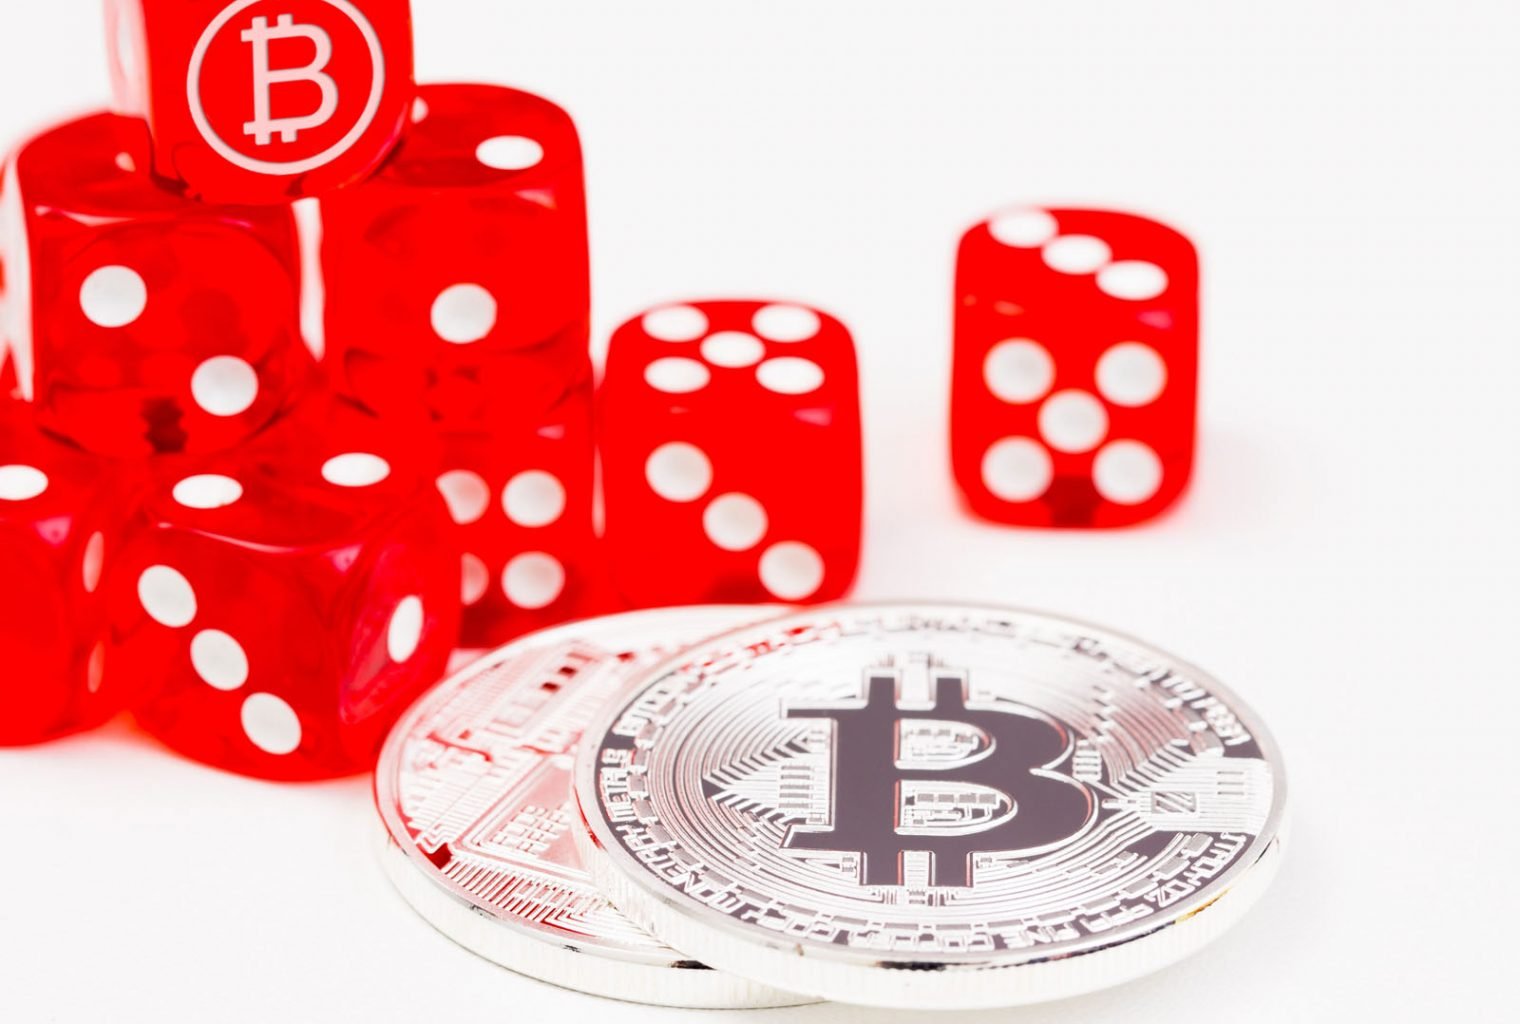 Slotland Online Gaming Site Now Offers Bitcoin Deposits And - 